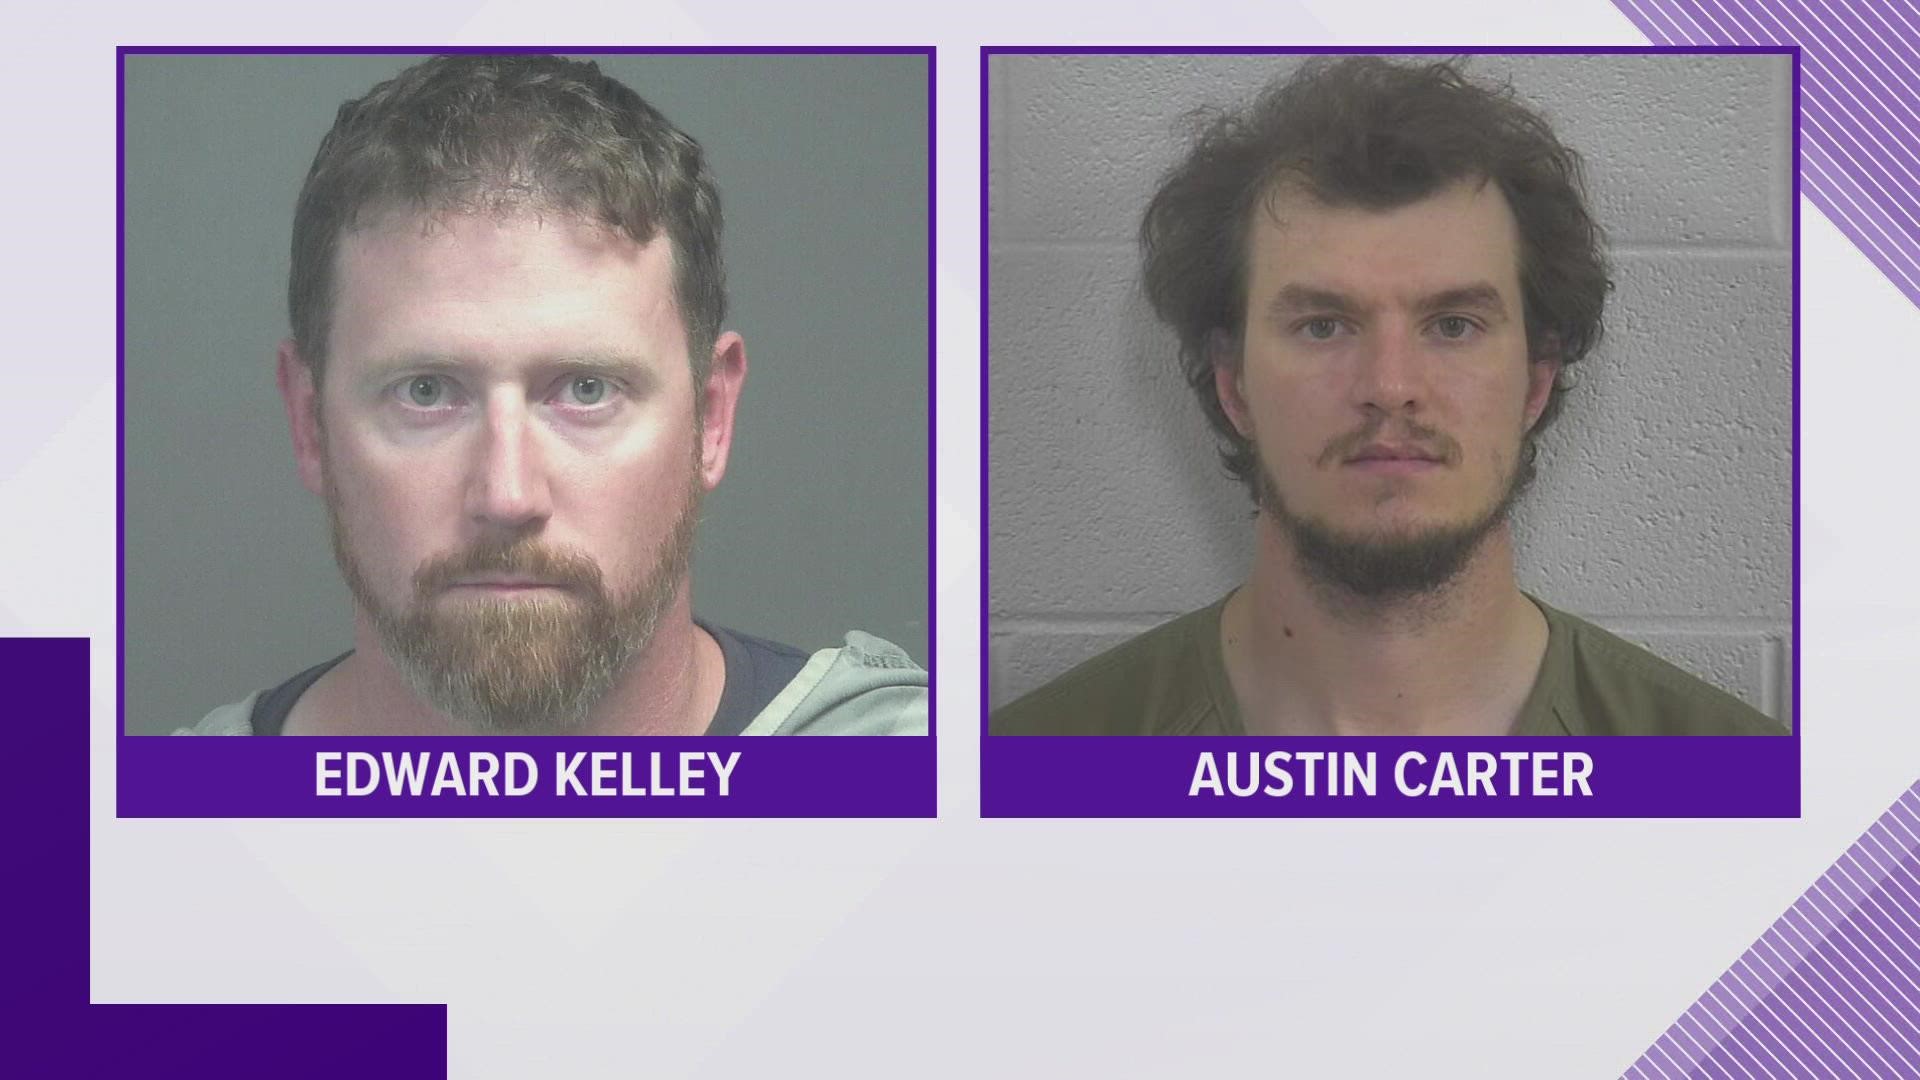 Edward Kelley and Austin Carter appeared Tuesday afternoon for an arraignment before U.S. Magistrate Judge Jill McCook in Knoxville.